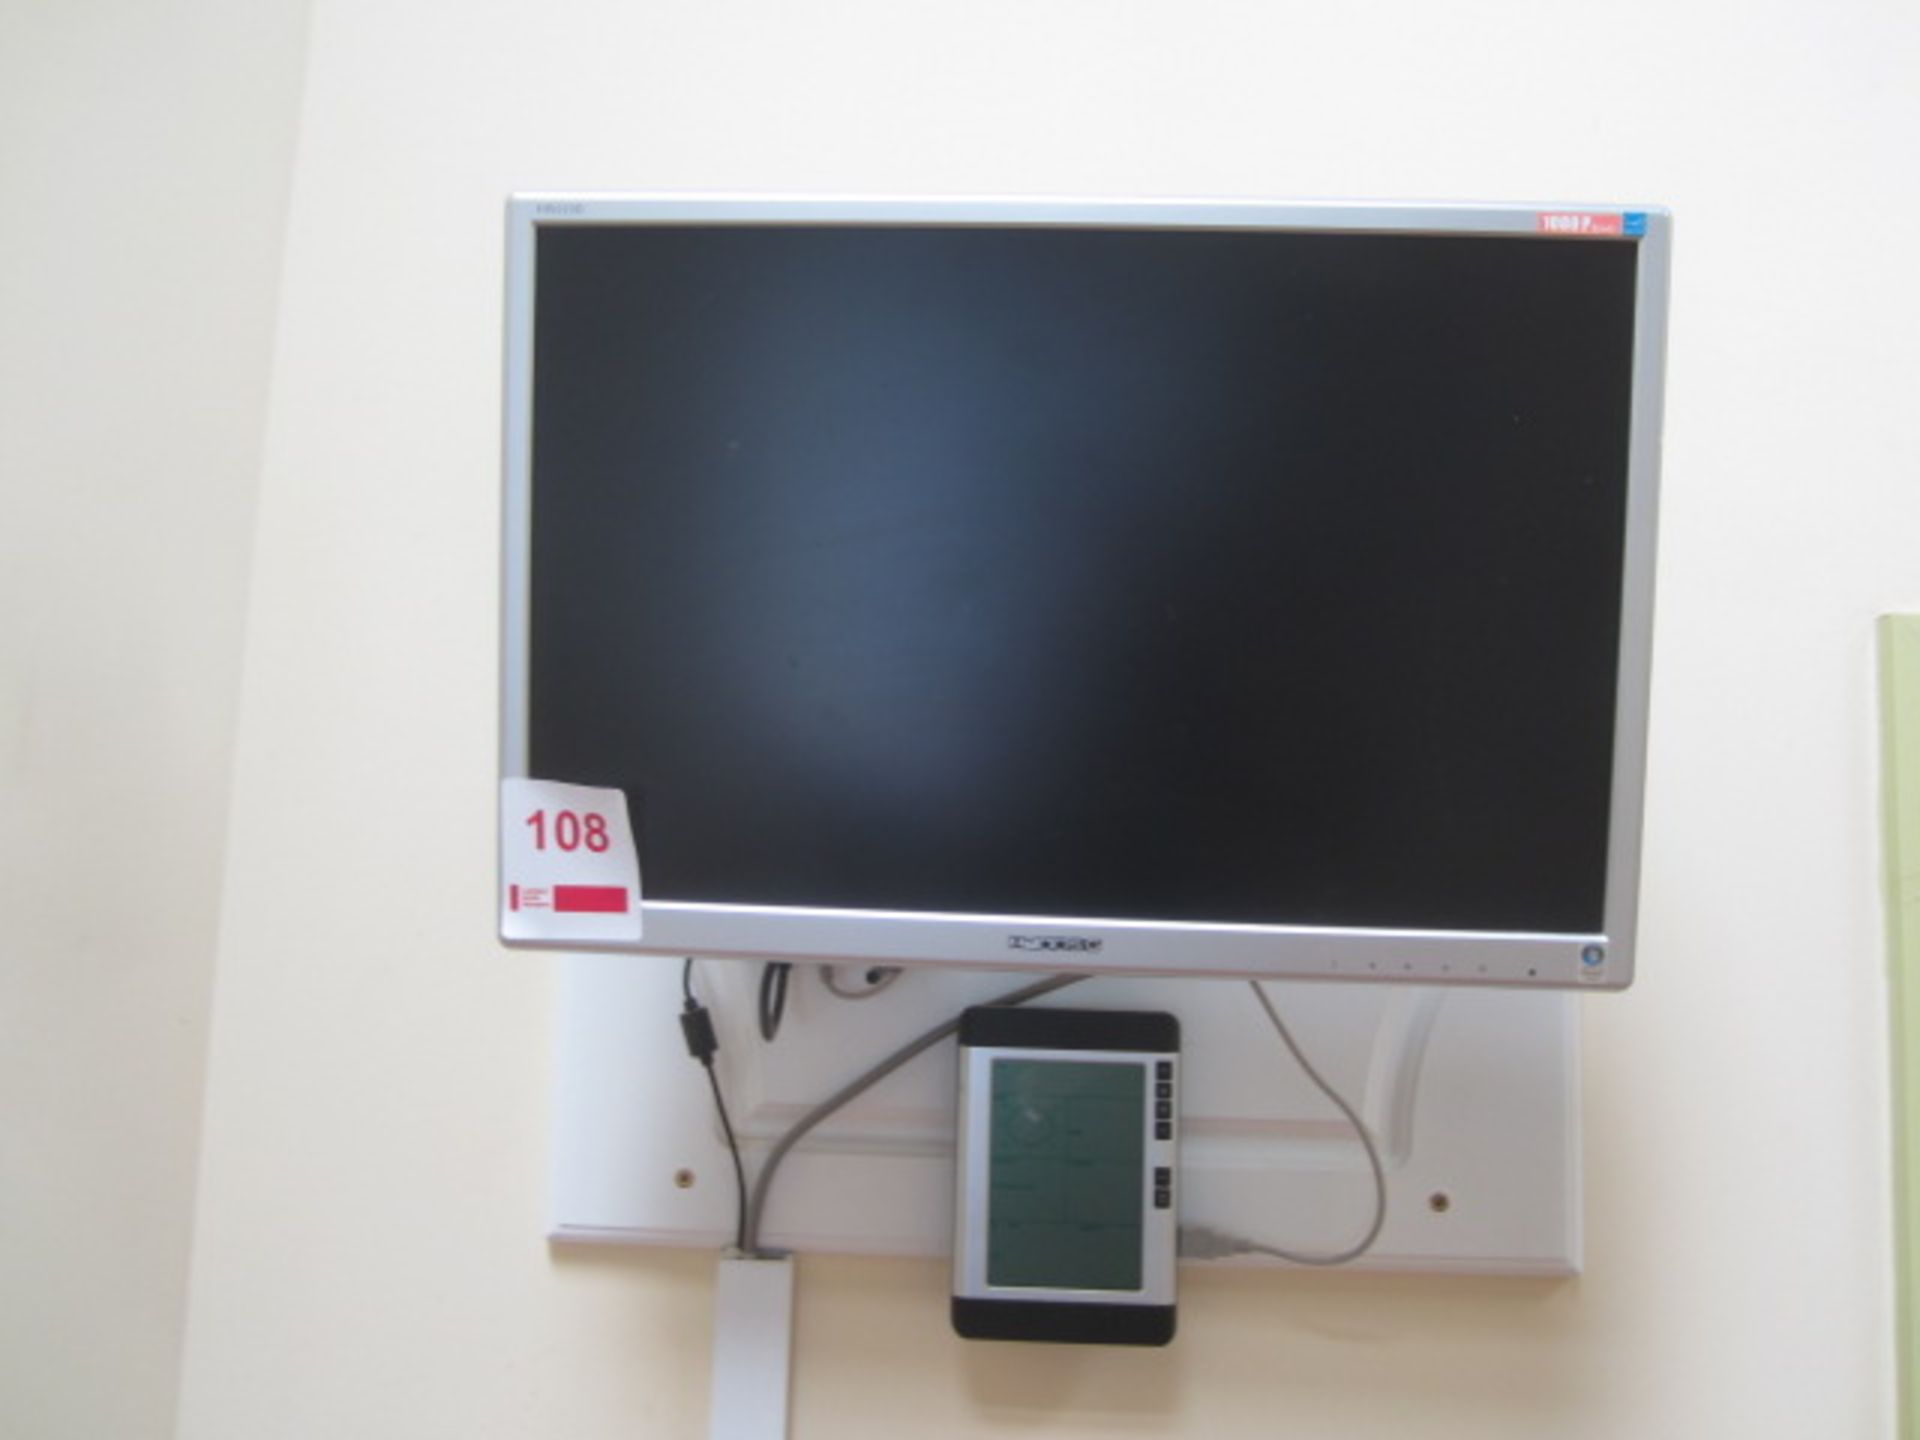 Hanns-G wall mounted monitor and a digital weather reader